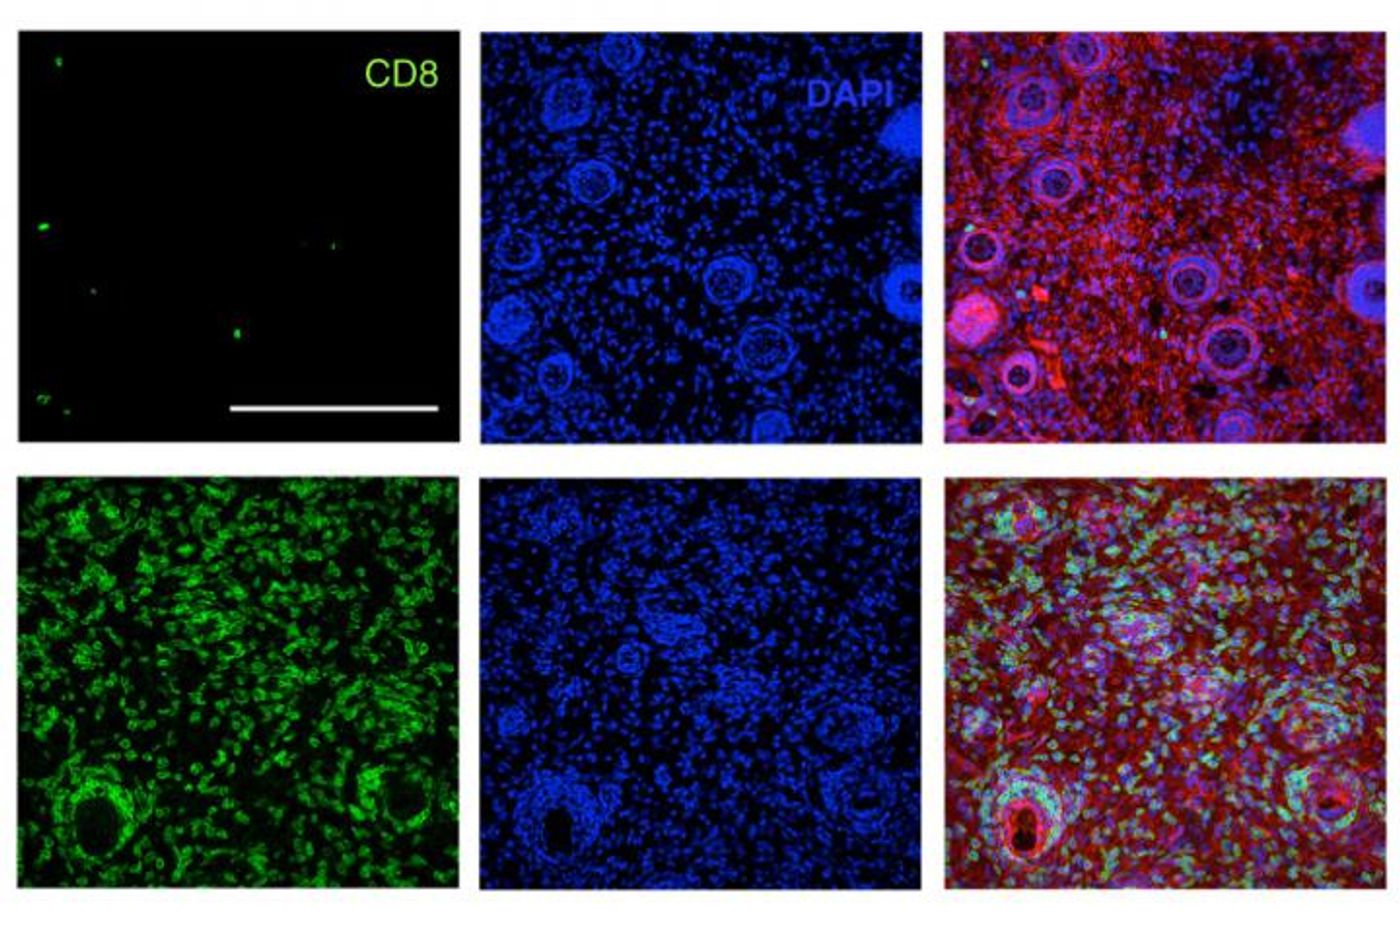 T cells are key to the adaptive immune response. In this image, the top row shows few T cells in untreated mice, while the bottom rows show many T cells produced after immunotherapy treatment. Credit: MIT